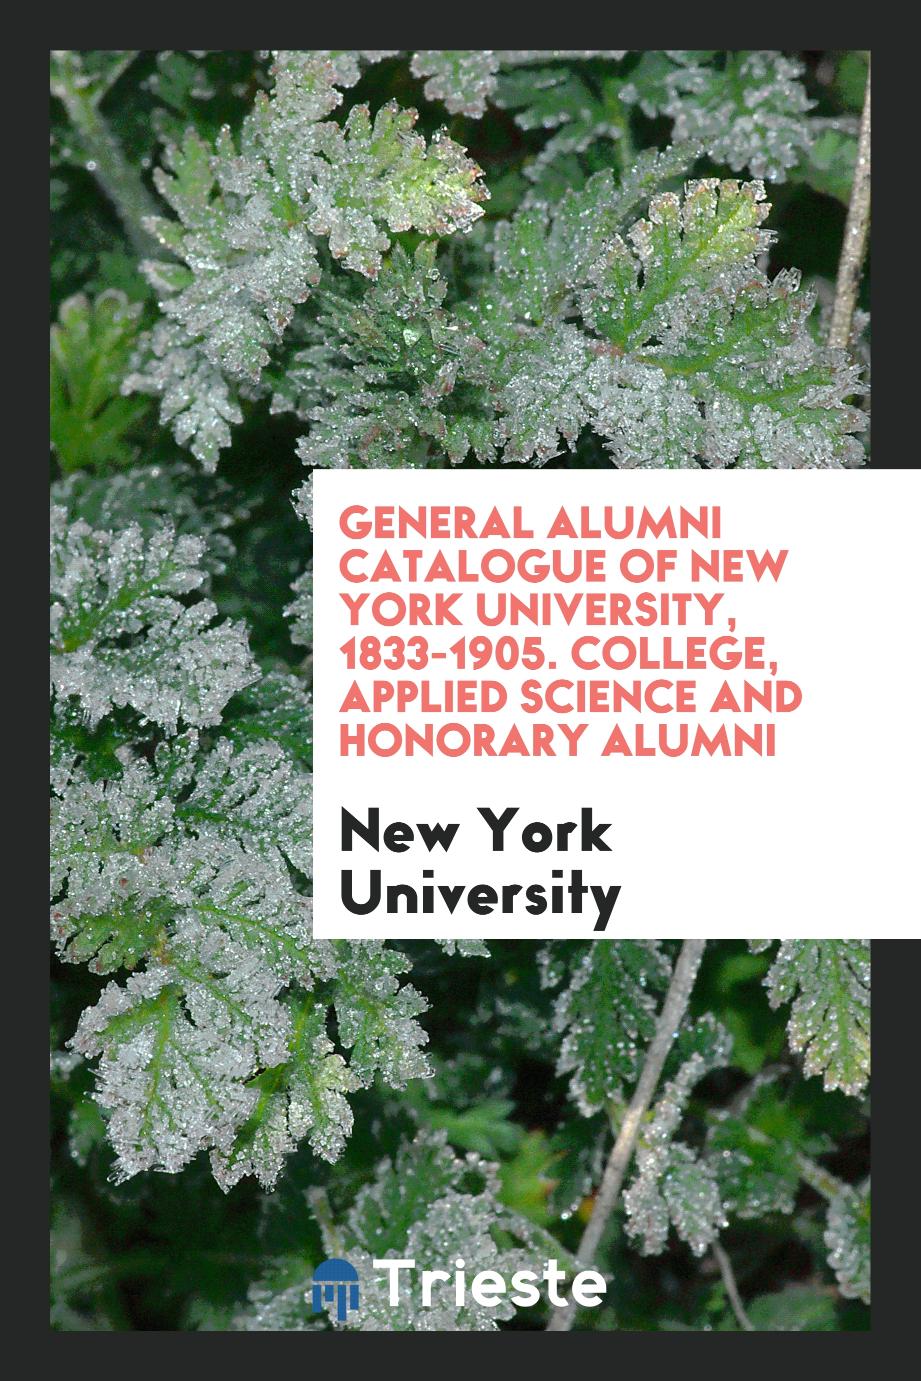 General Alumni Catalogue of New York University, 1833-1905. College, Applied Science and Honorary Alumni